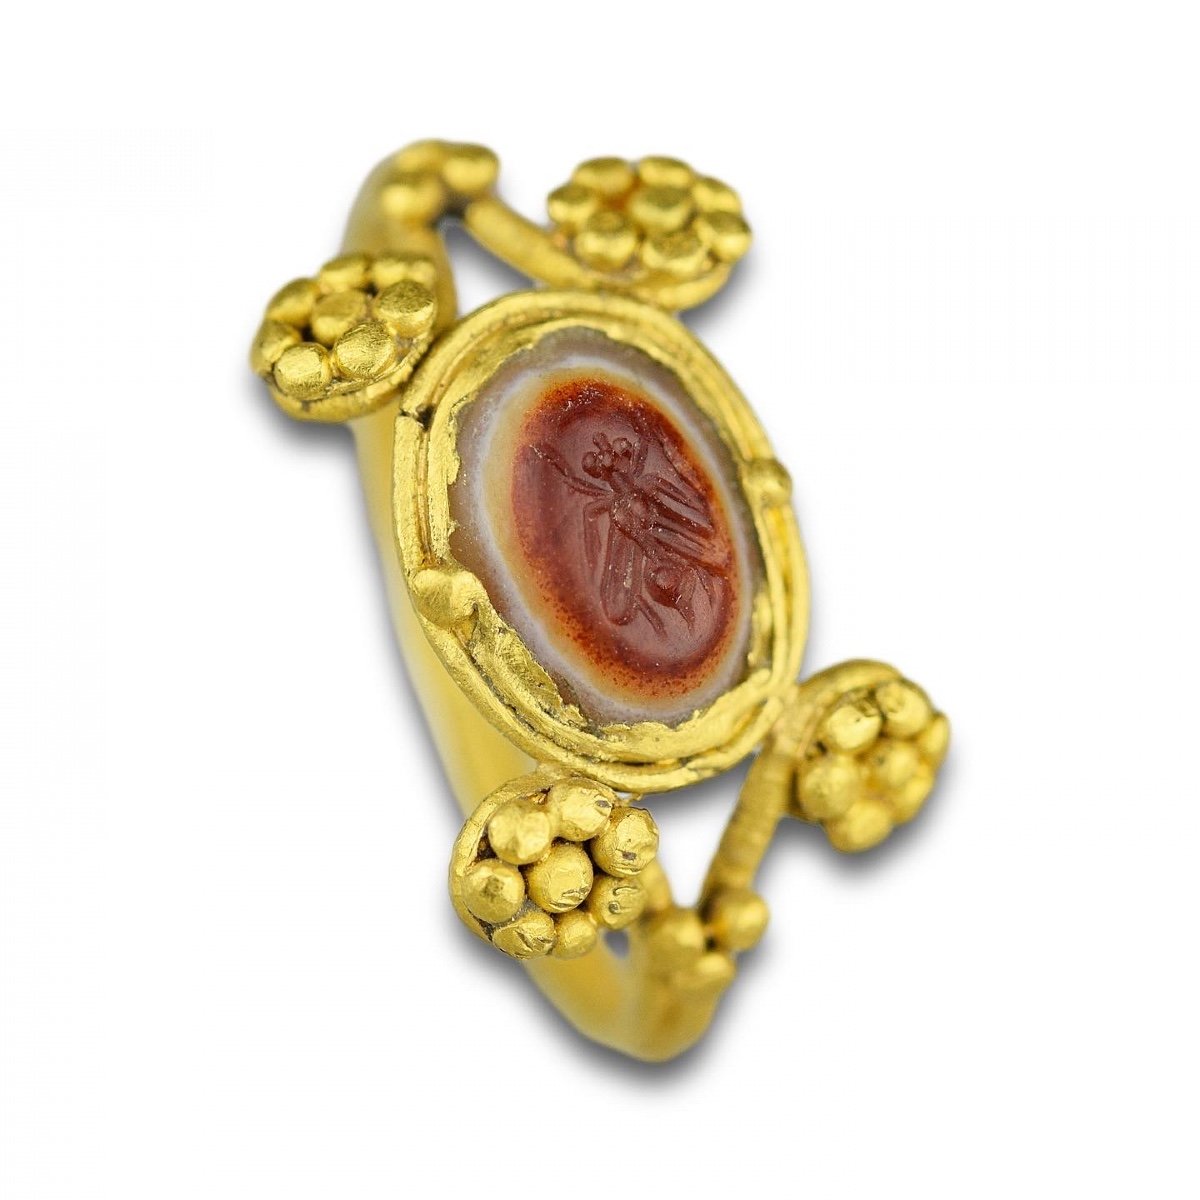 Ancient Gold Ring With An Agate Intaglio Of A Fly. Roman, 2nd - 3rd Century Ad.